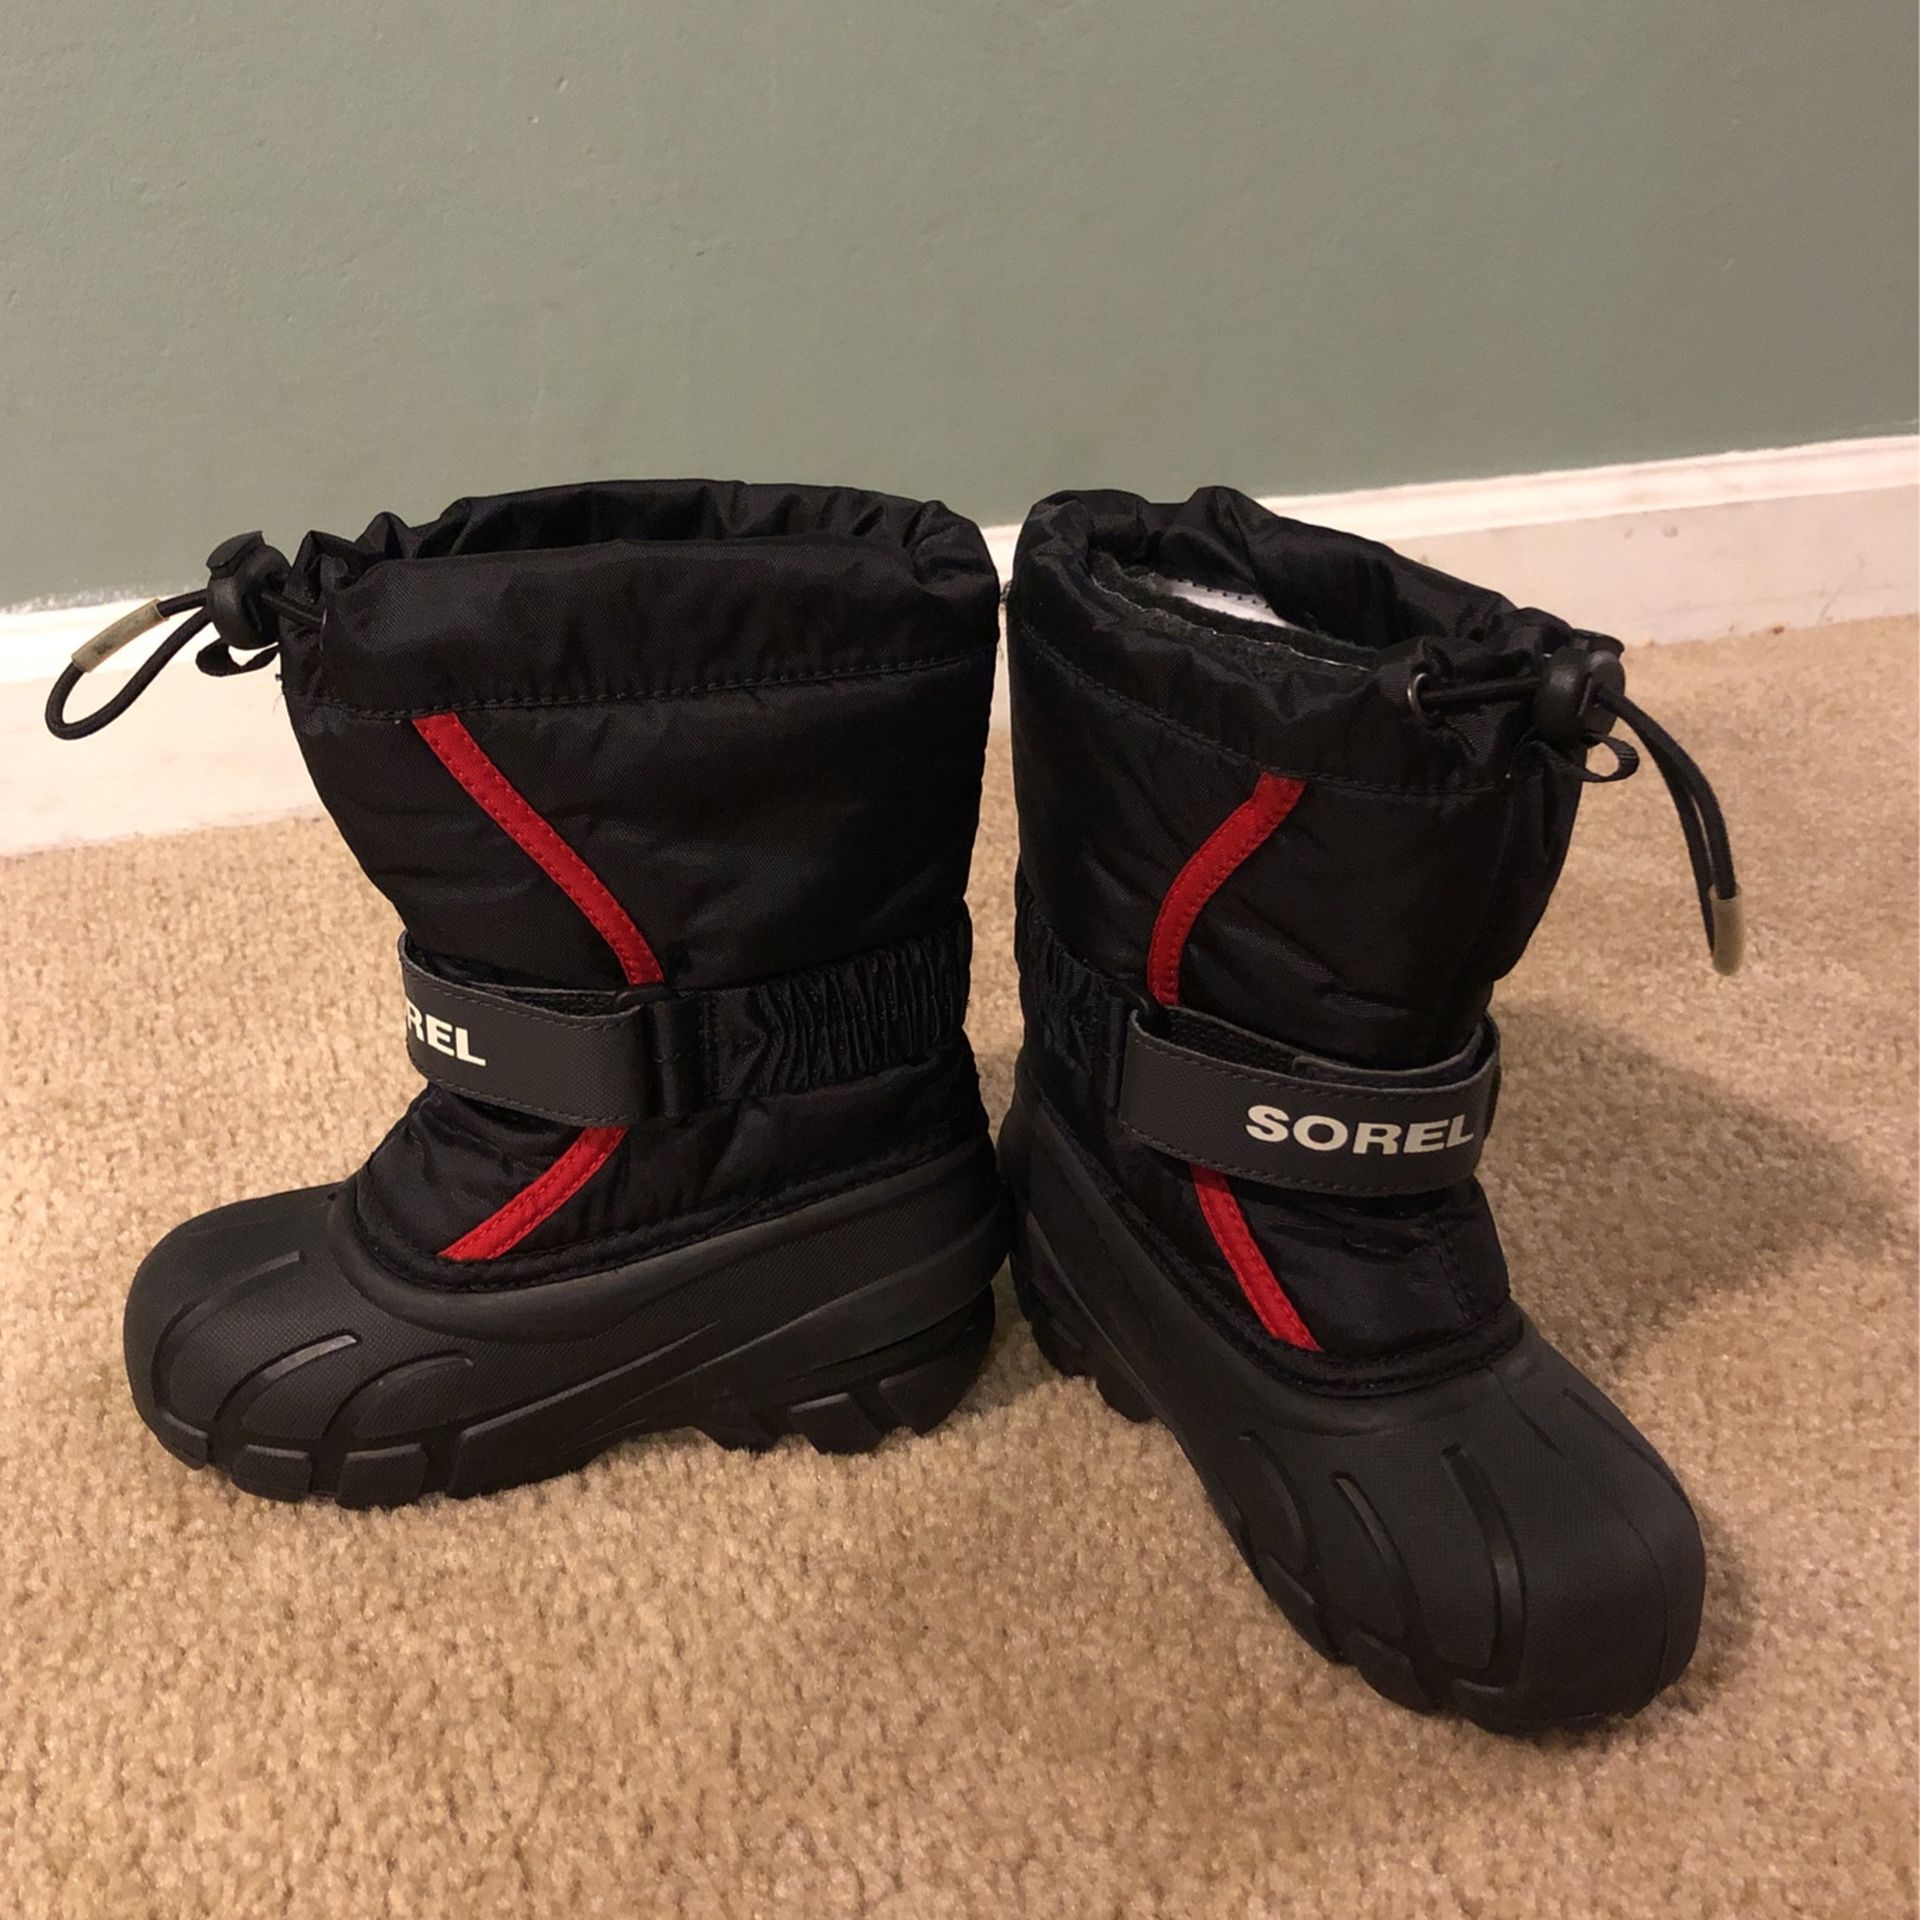 Boots For Snow Size 10 .